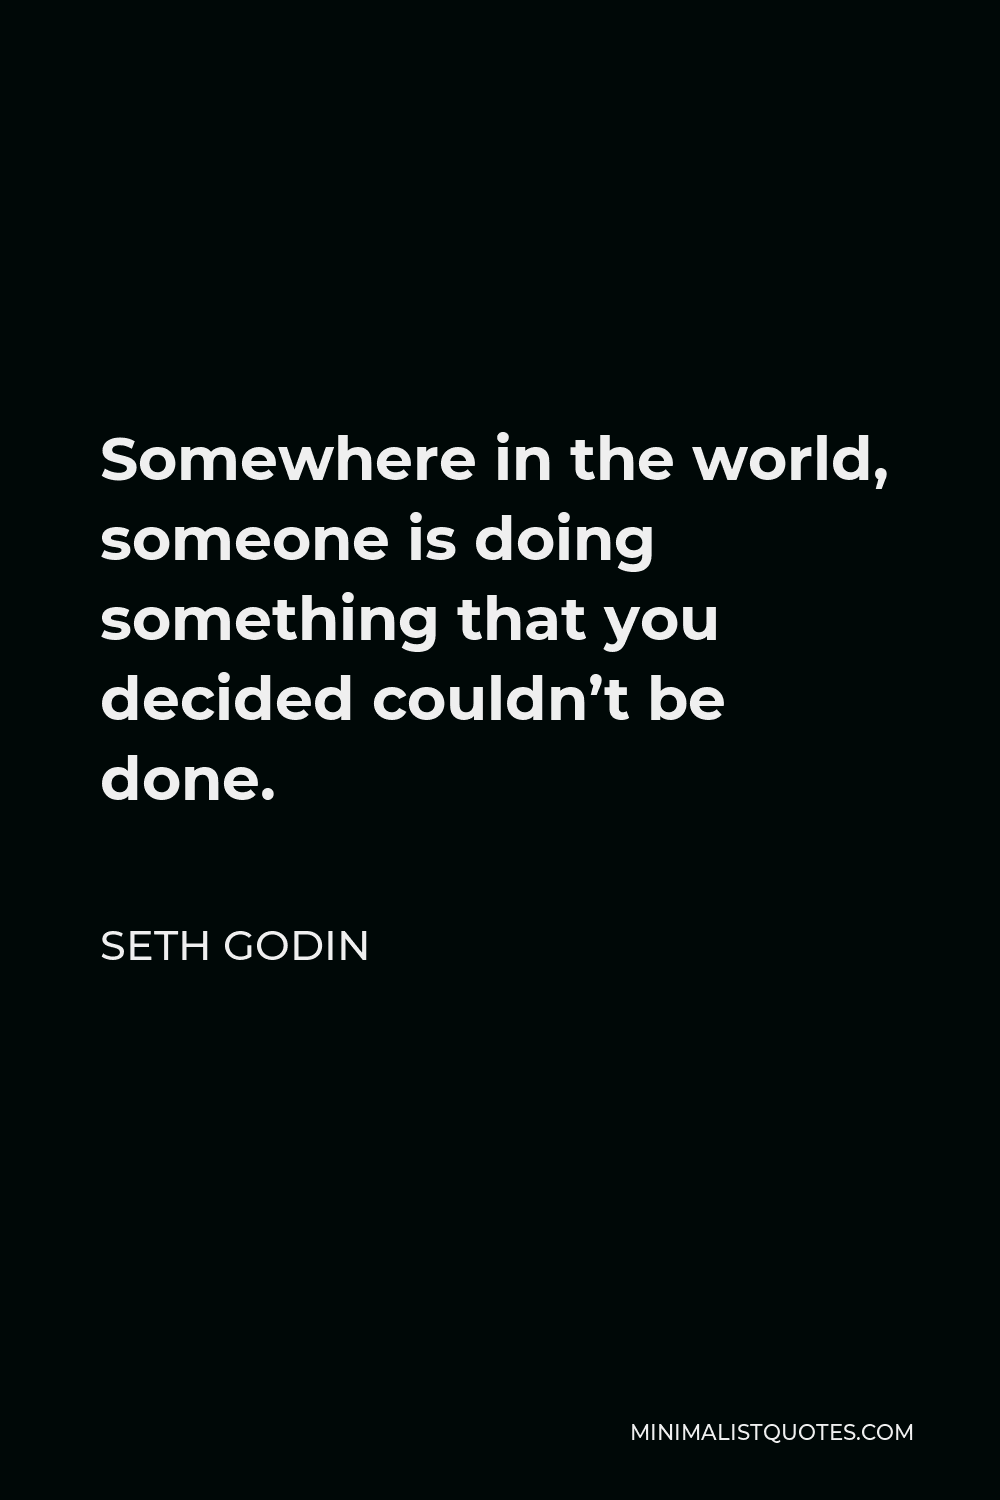 Seth Godin Quote - Somewhere in the world, someone is doing something that you decided couldn’t be done.